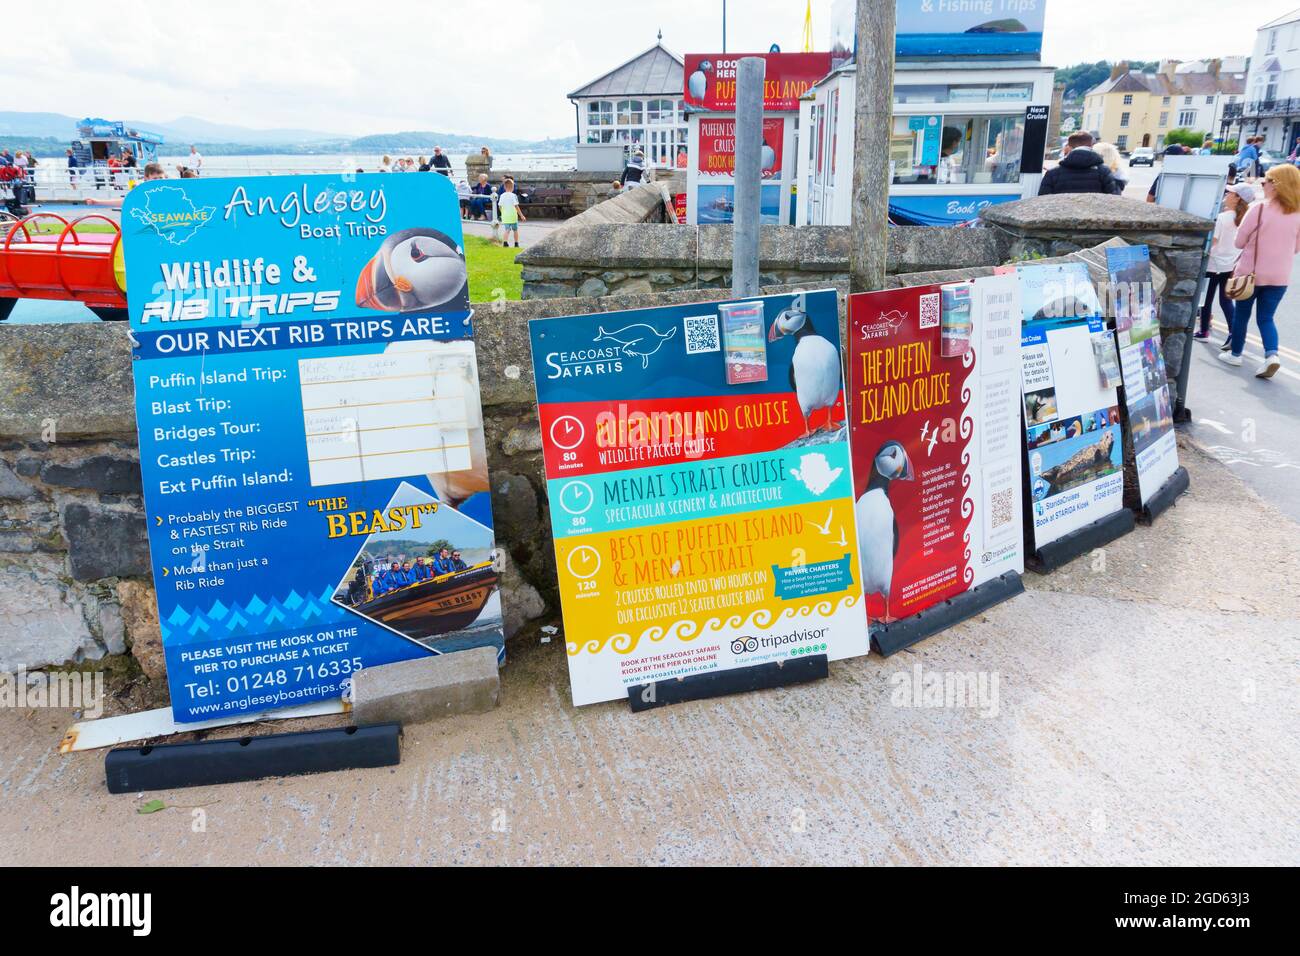 Signs advertising wildlife and boat trips around the Menai straits and Puffin Island on the sea front in Beaumaris Anglesey North Wales UK Stock Photo